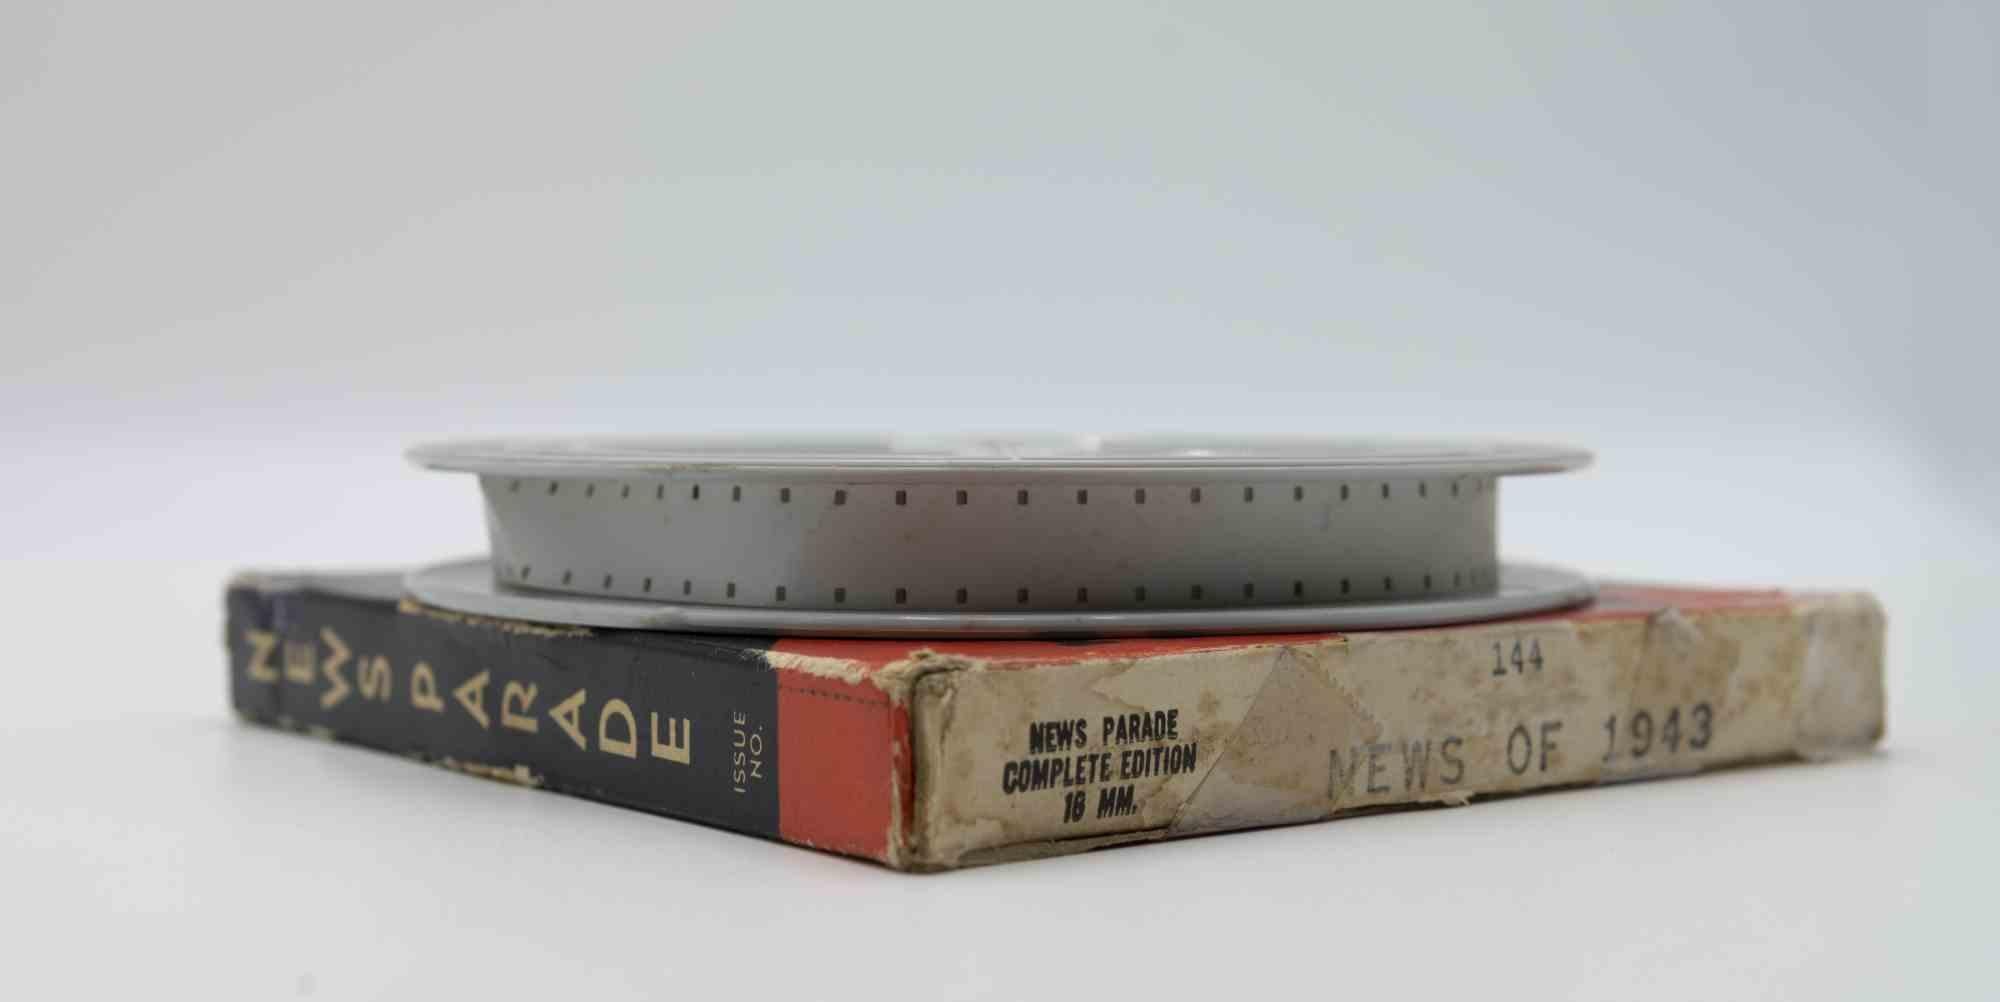 New Parade Castle Film News of 1943.

18 mm complete edition. Original slipcase.

Good conditions. 

